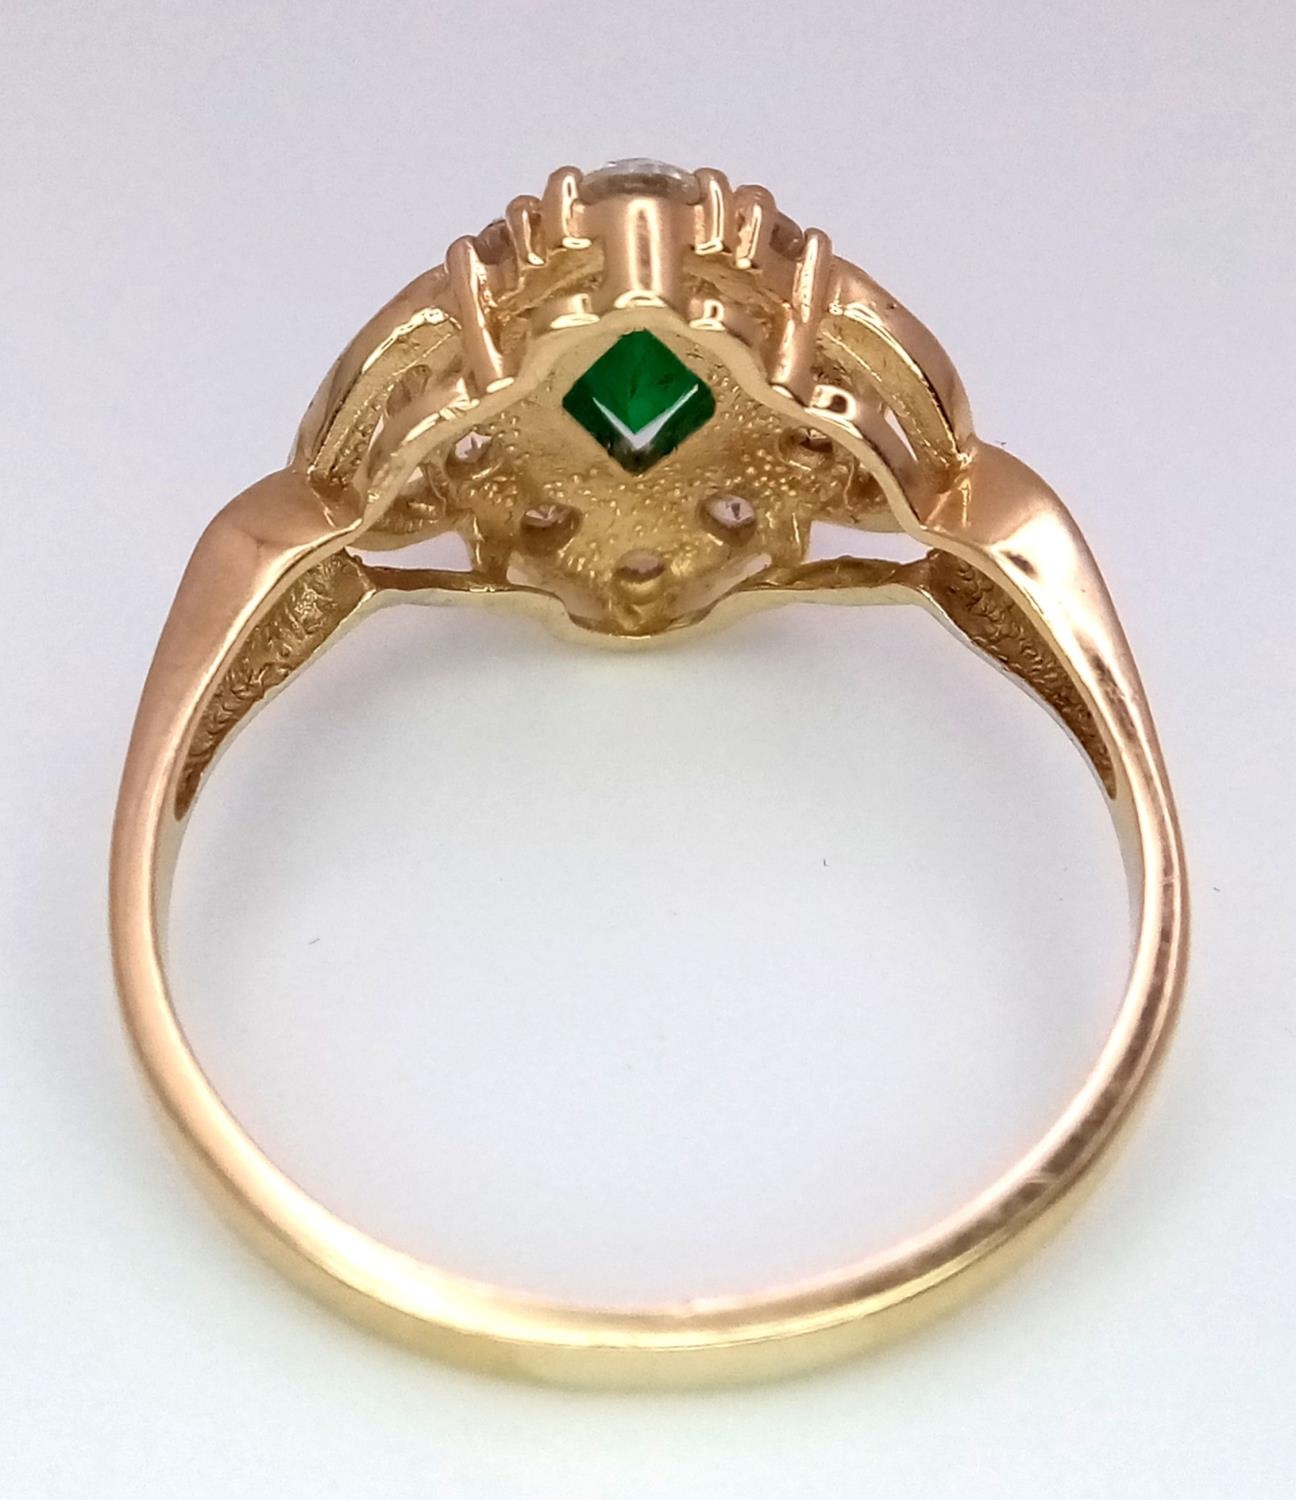 A 14K Yellow Gold Emerald and White Stone Ring. 1.2ct emerald. Size O, 3.34g total weight. - Image 4 of 5